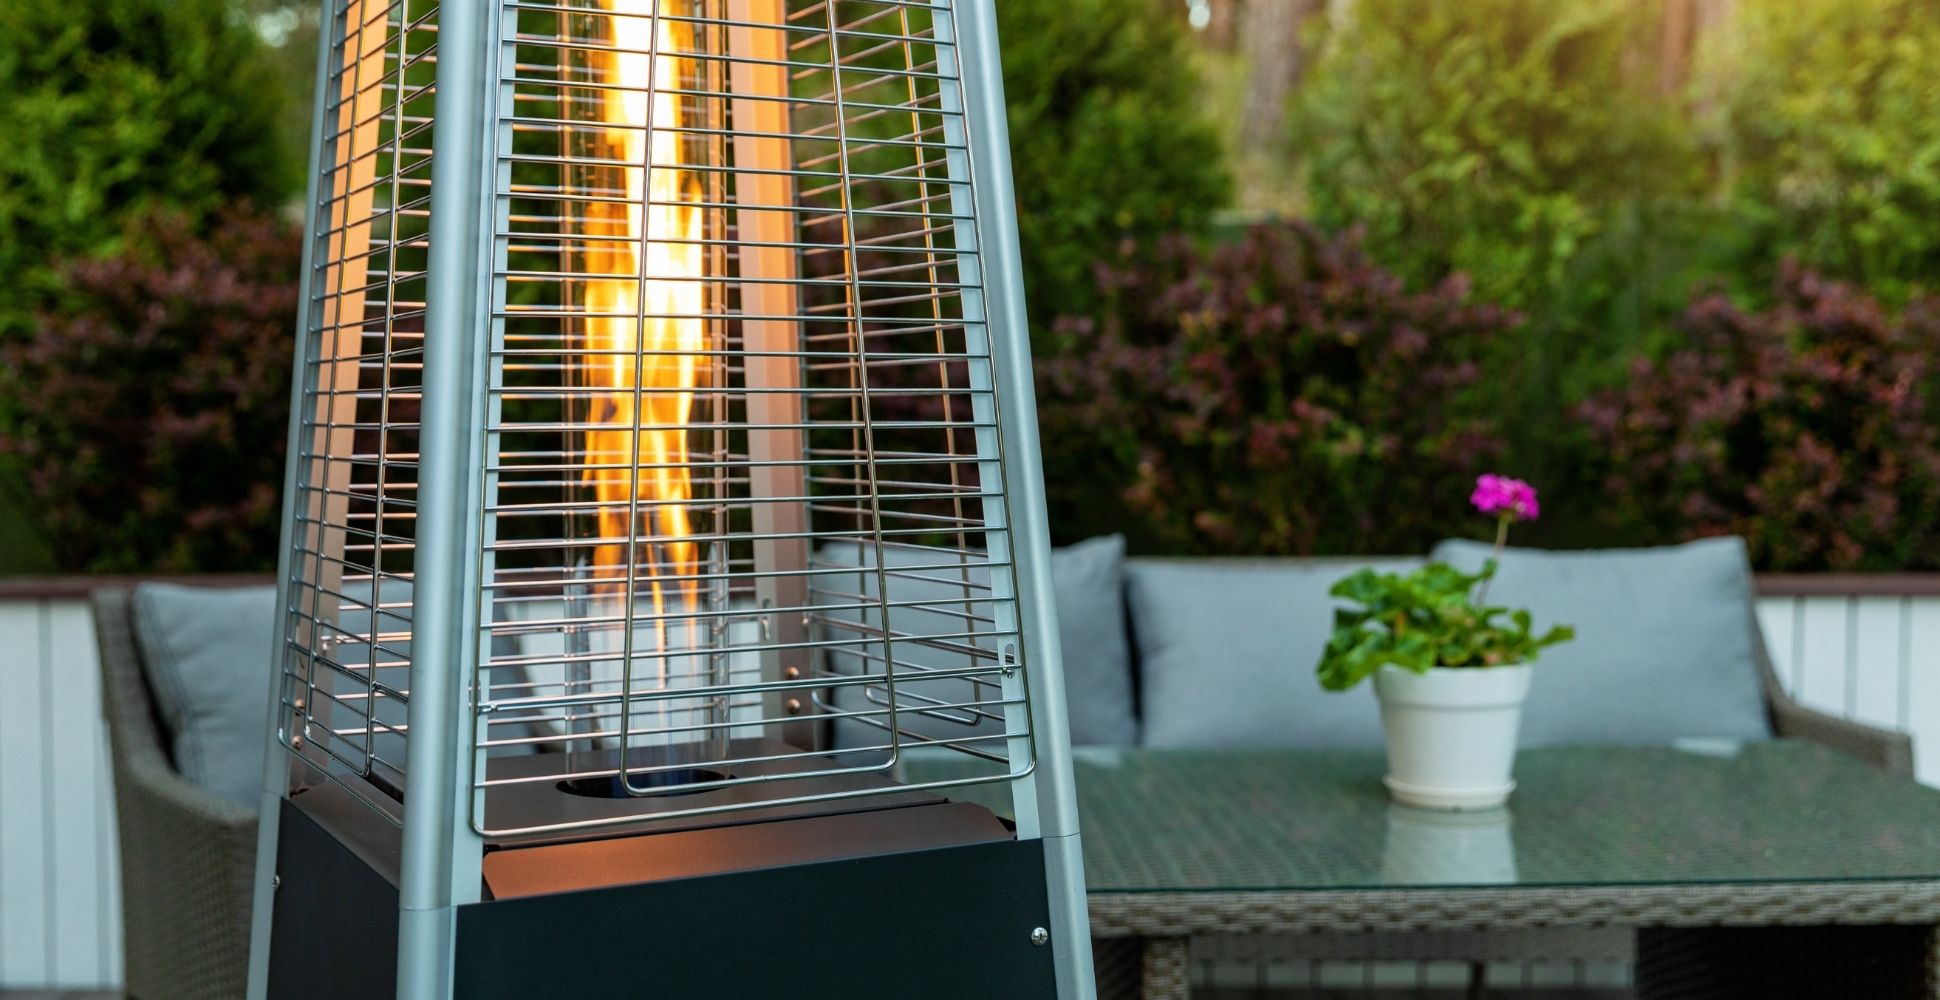 How To Turn On Outdoor Gas Heater